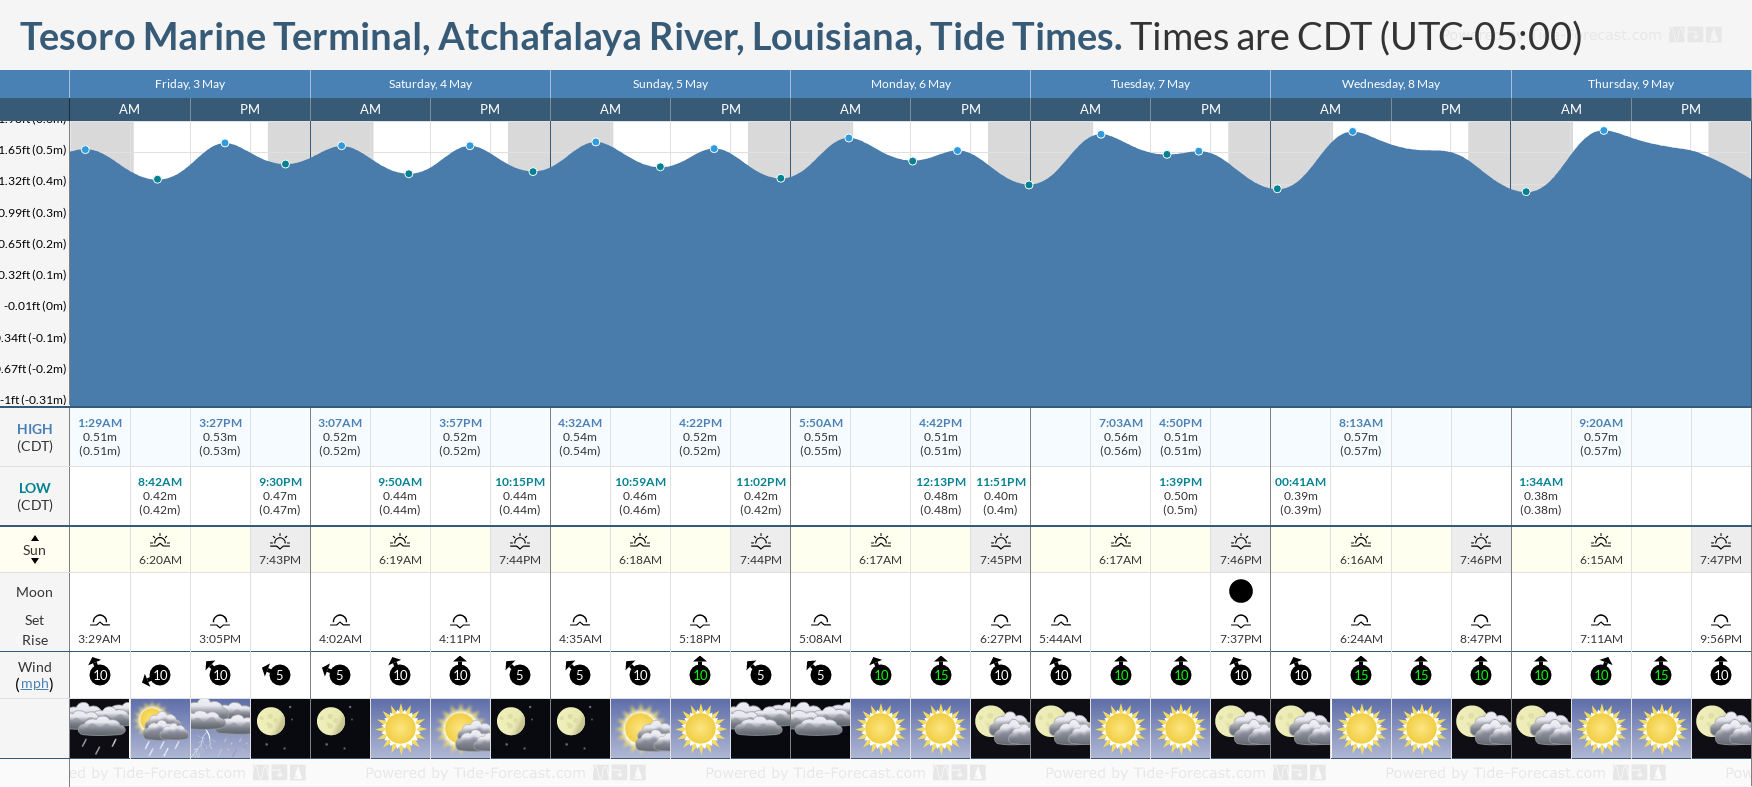 Tesoro Marine Terminal, Atchafalaya River, Louisiana Tide Chart including high and low tide tide times for the next 7 days